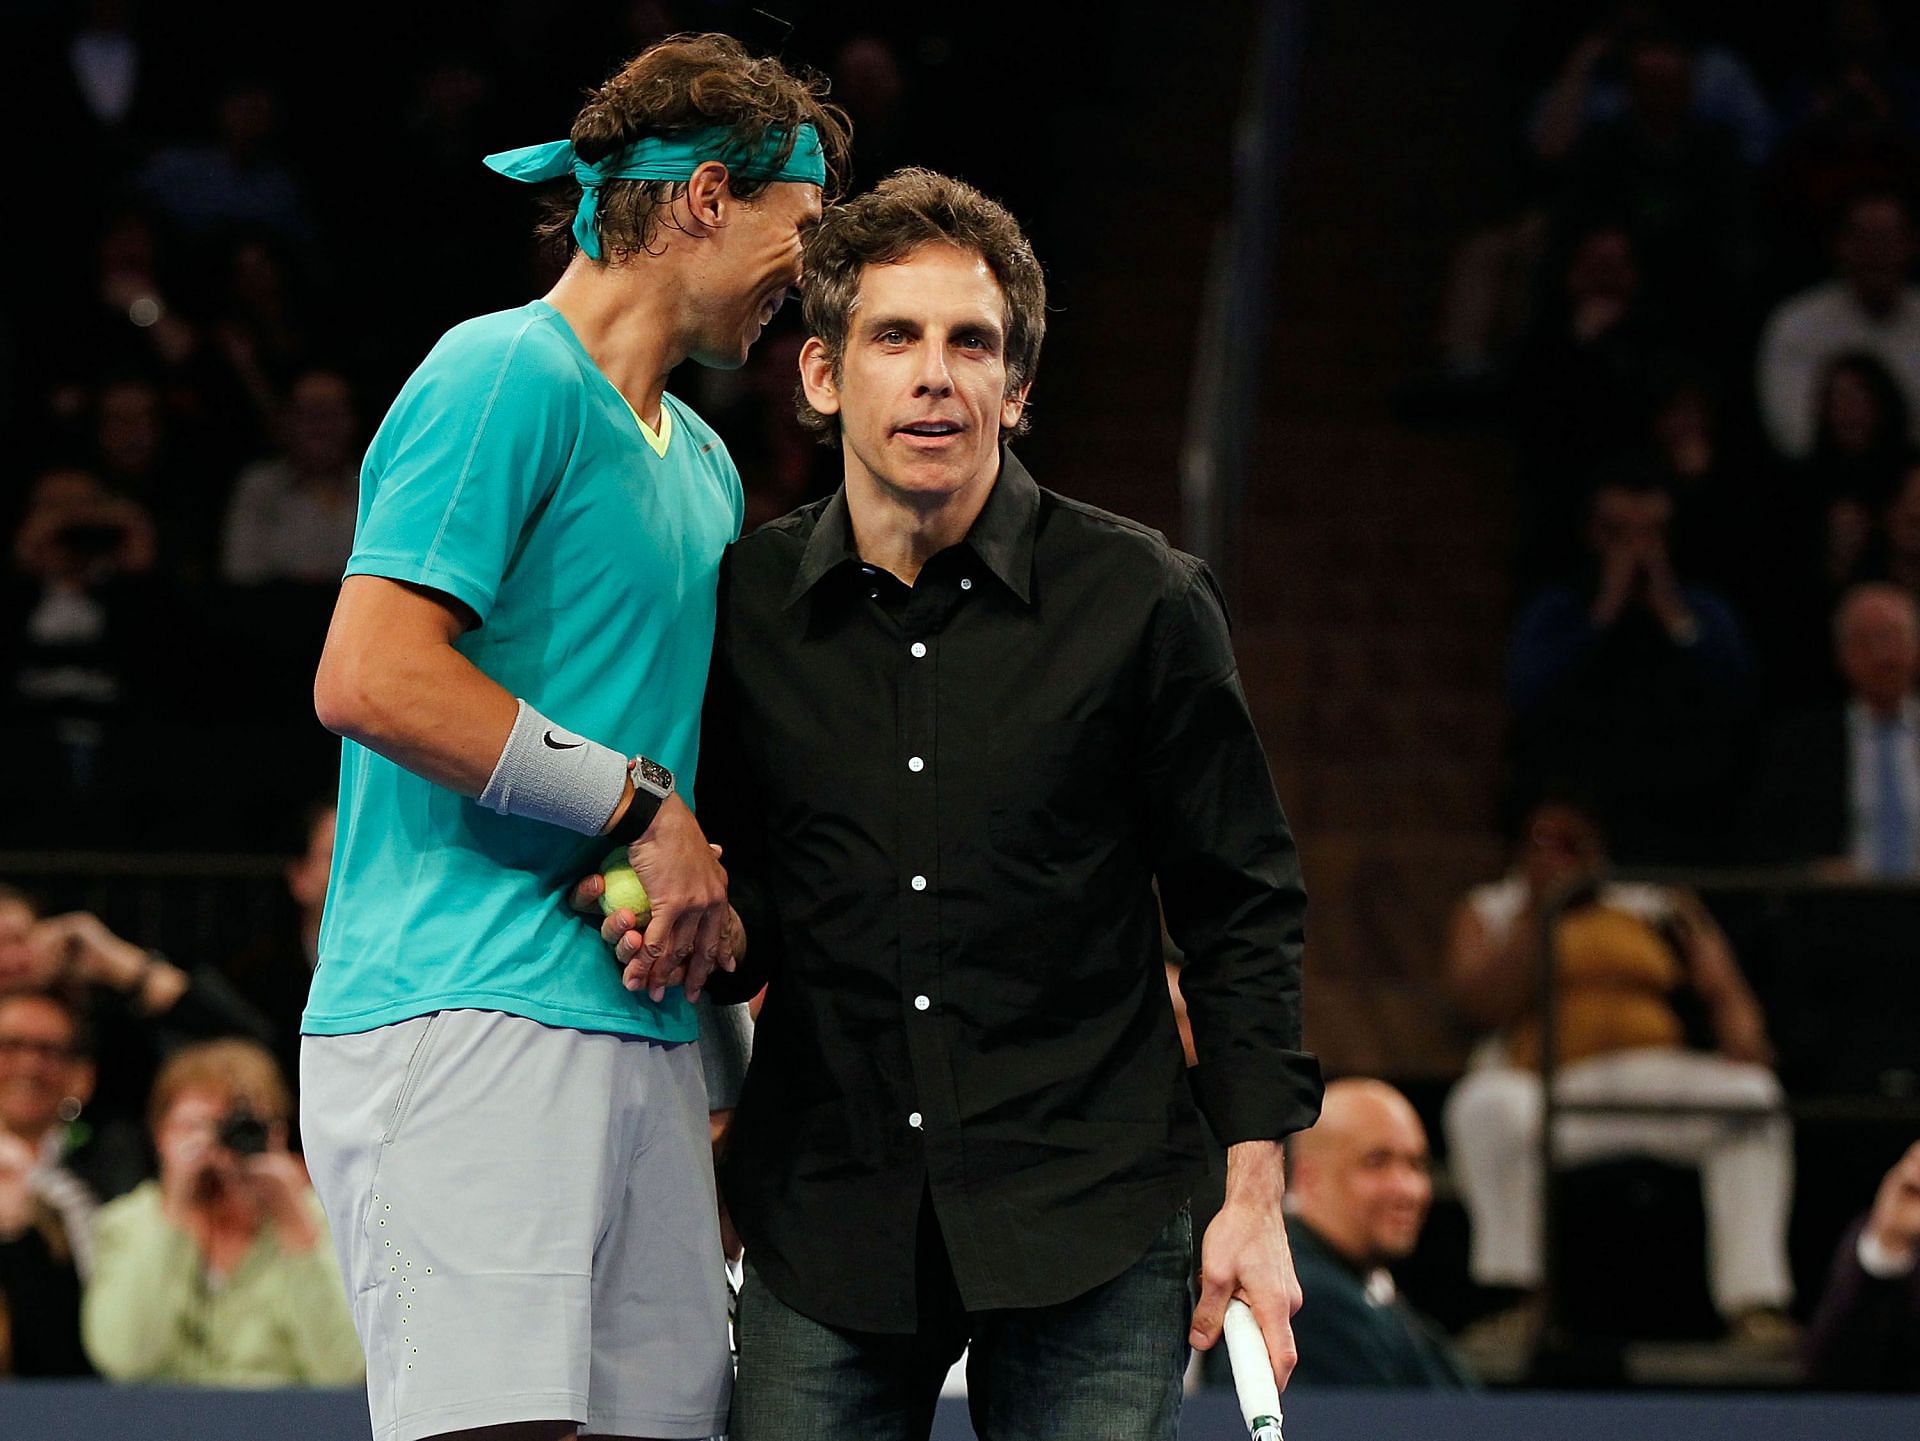 Ben Stiller recalled the experience of playing alongside Rafael Nadal in a recent interview